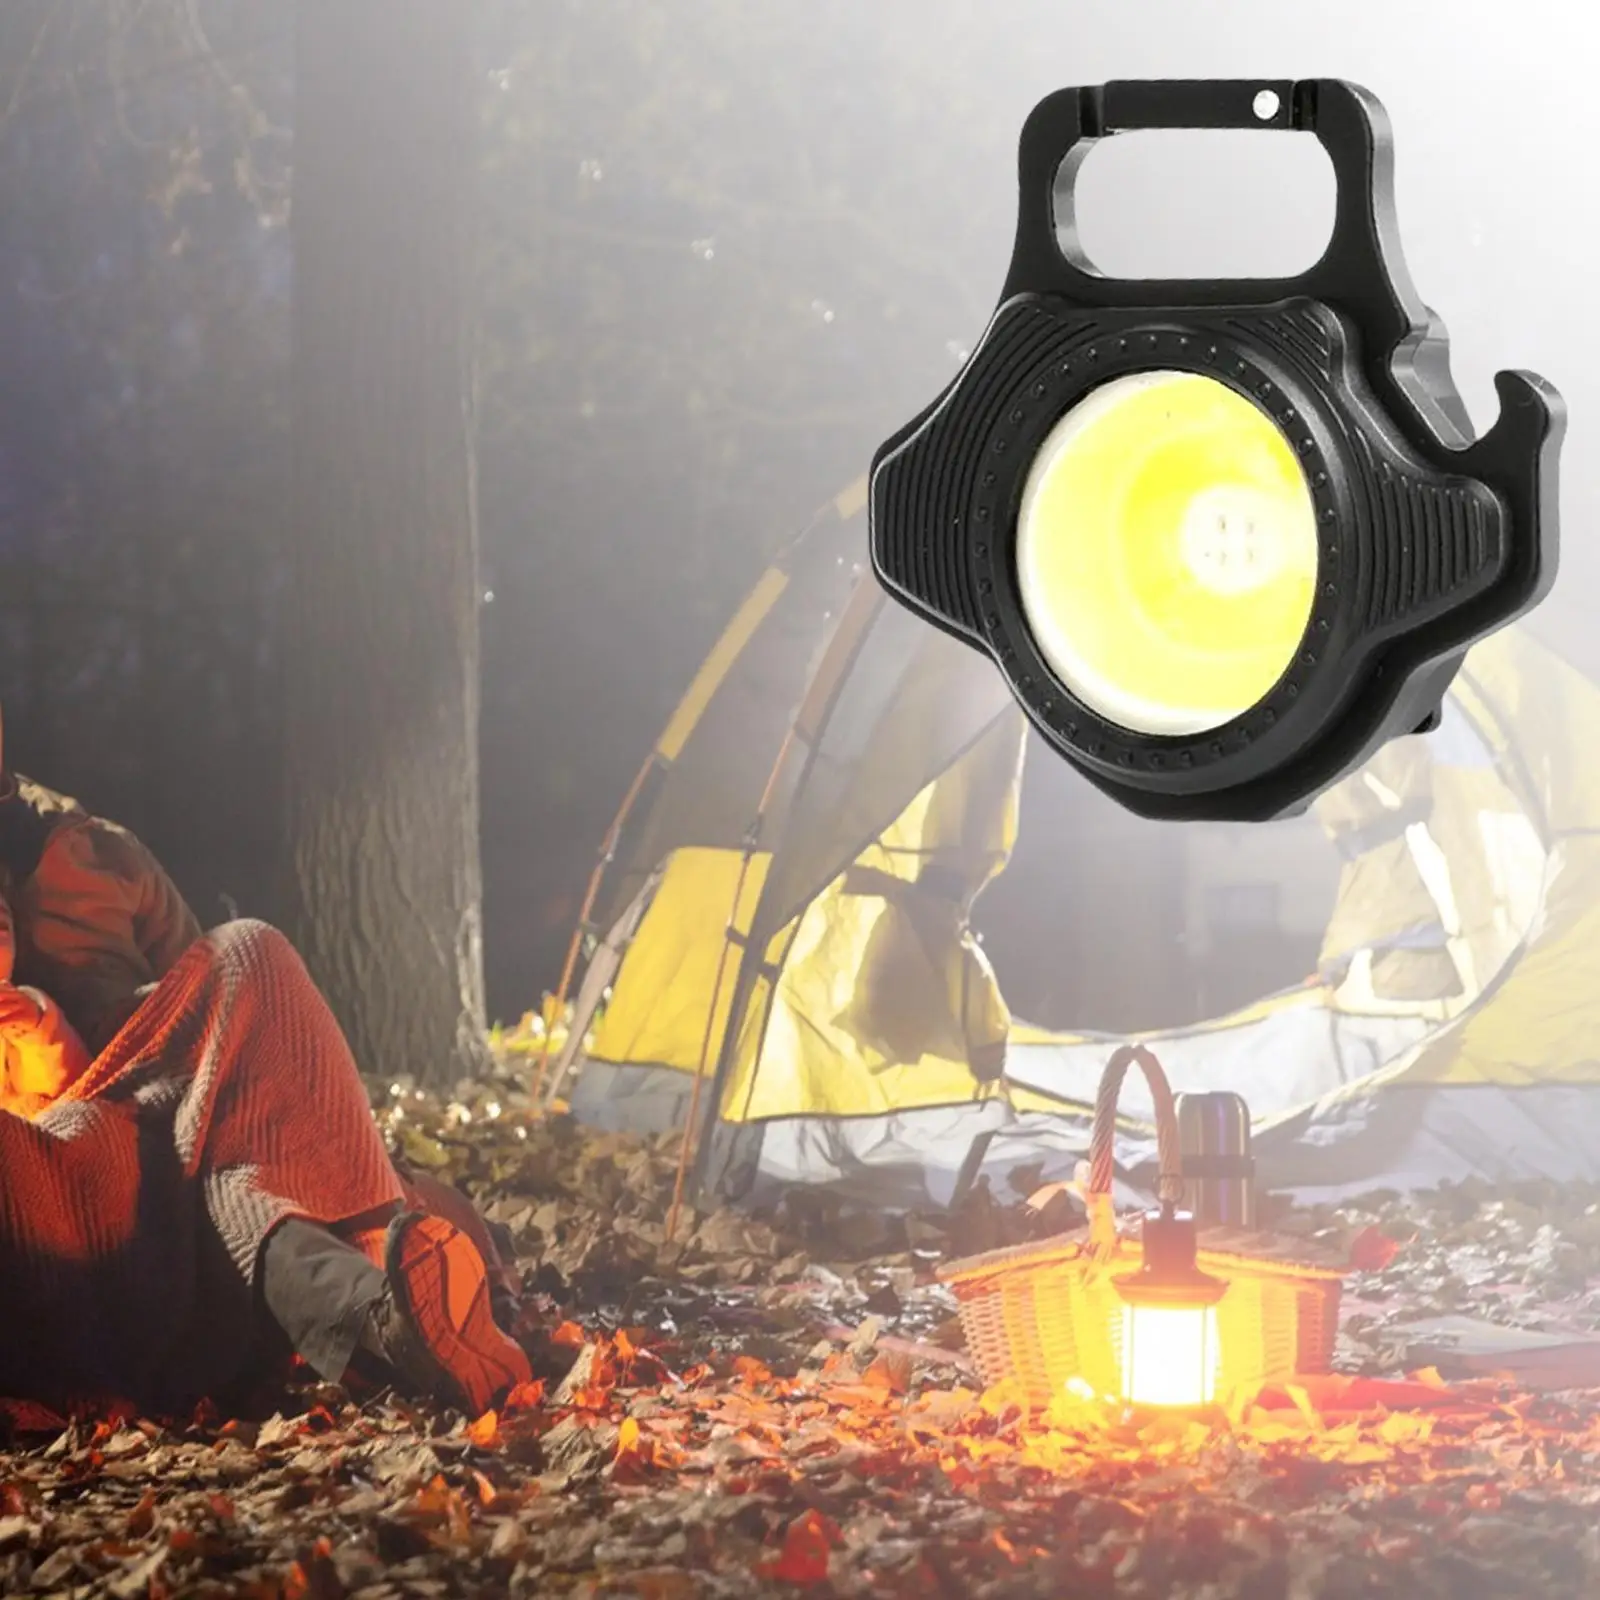 Mini Keychain Torch Folded Super Bright Portable Magnetic Bottle Opener LED Flashlight for Daily Use Walking Camping Emergency